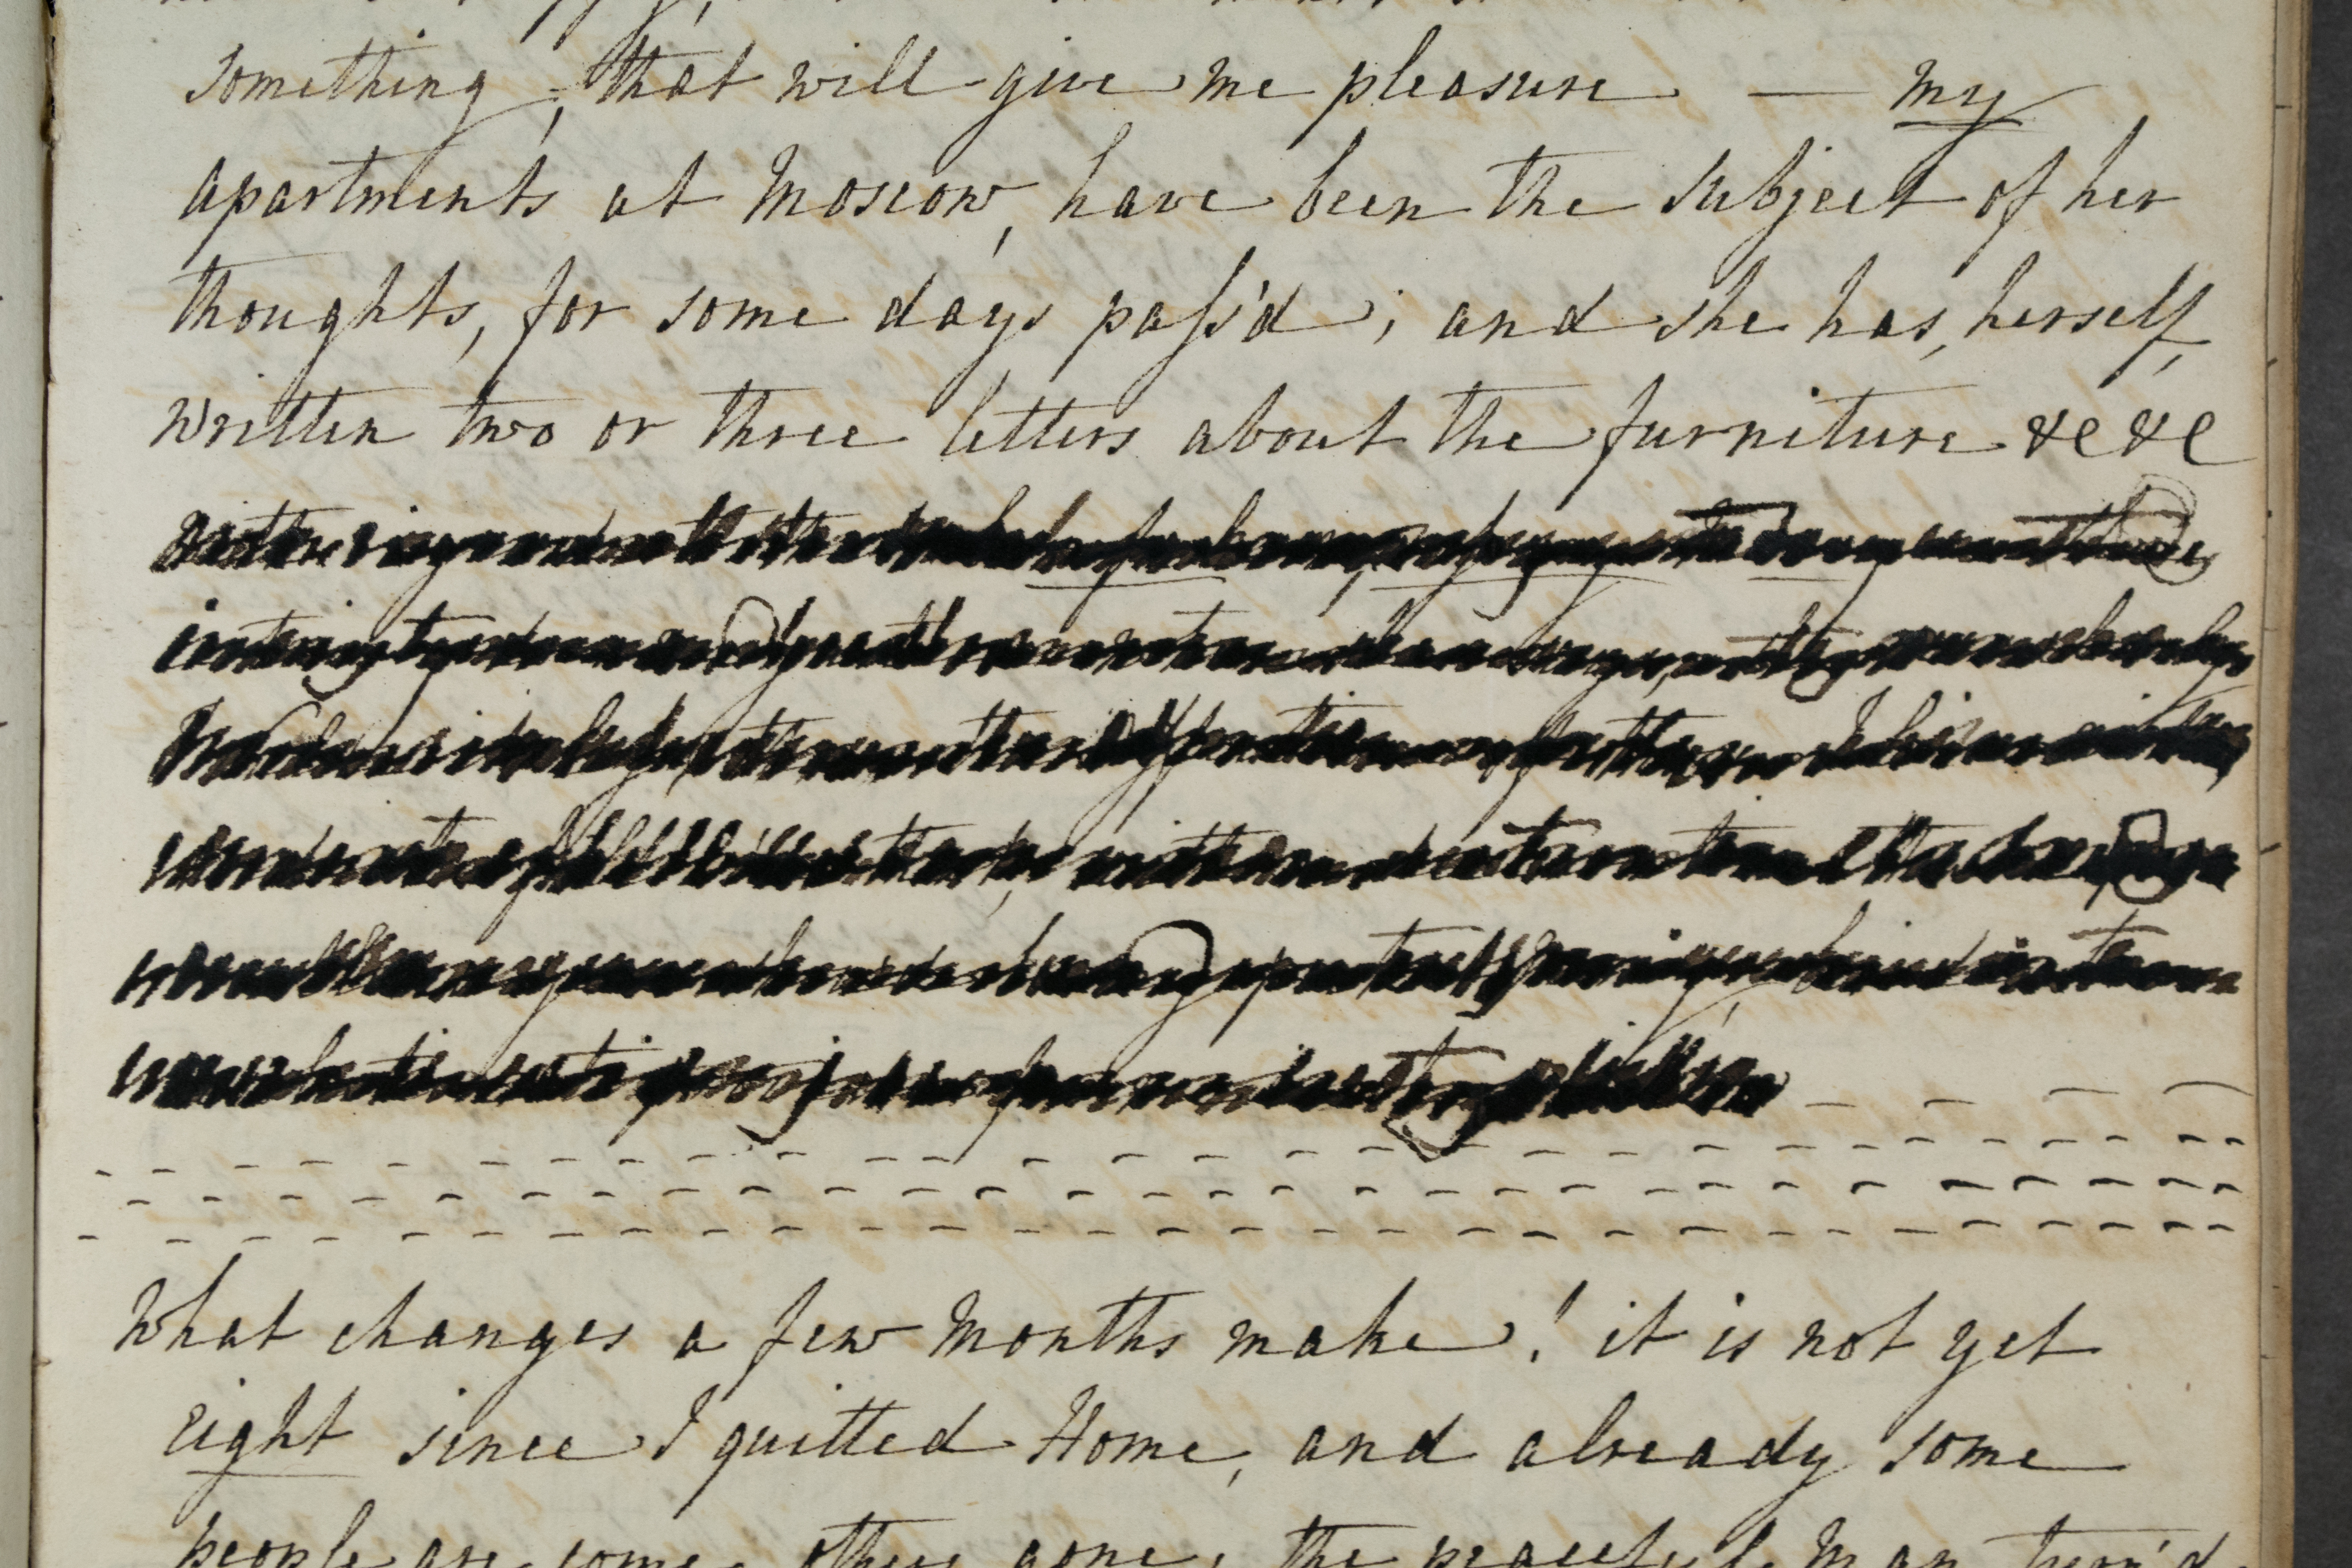 Margaret Fuller's Archive: Absence, Erasure, and Critical Work